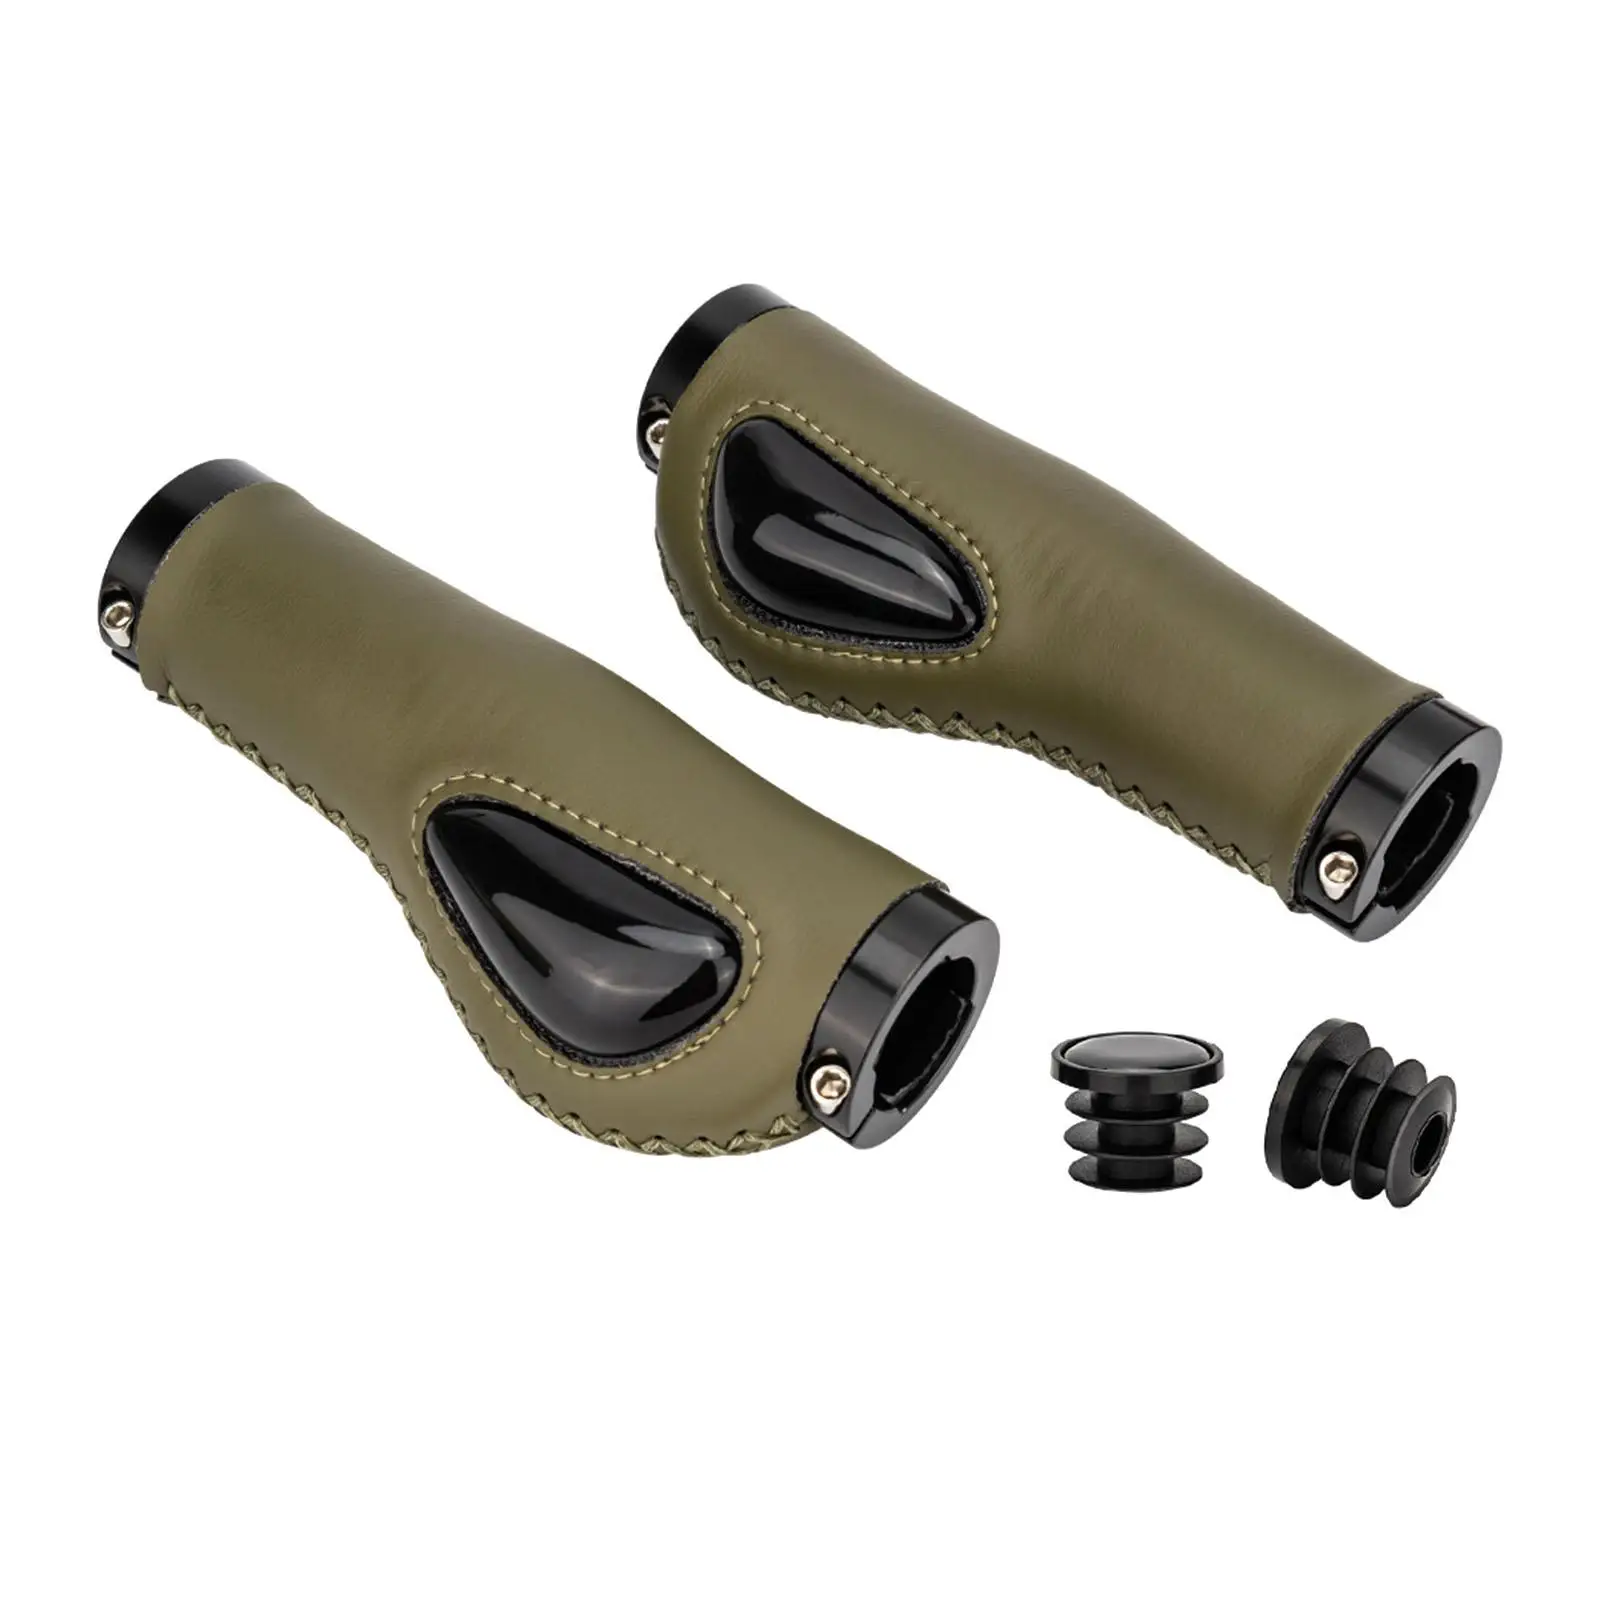 MTB Bike Handlebar Grips Shock Absorption Protection Cover for Bicycle